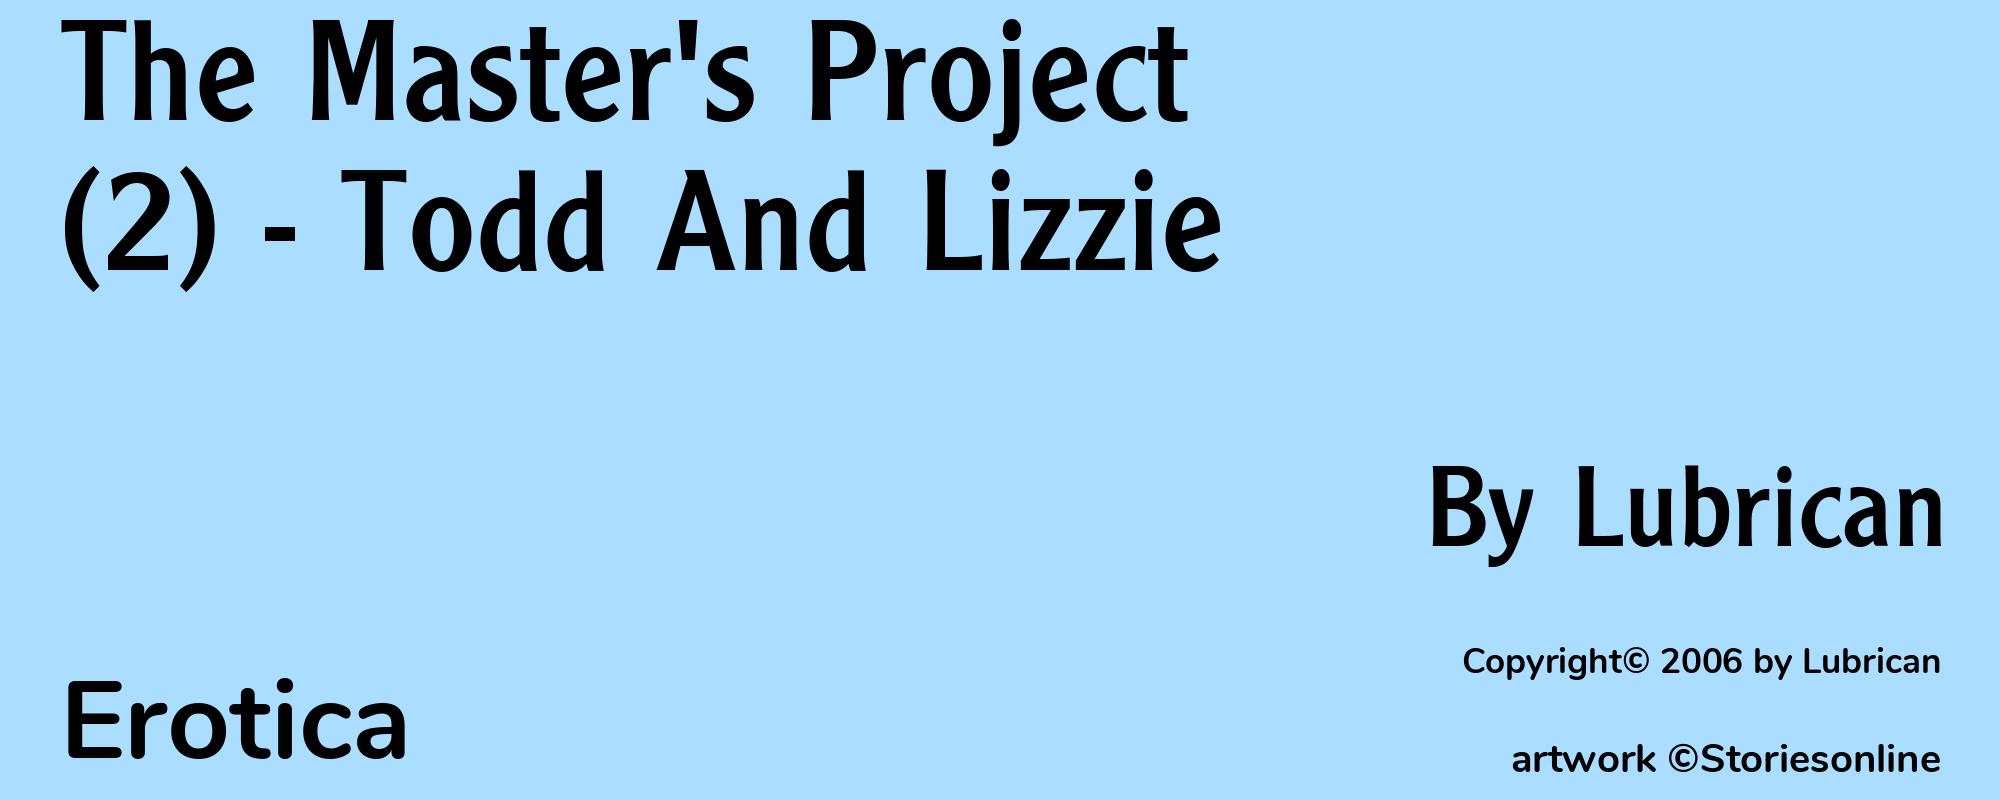 The Master's Project (2) - Todd And Lizzie - Cover